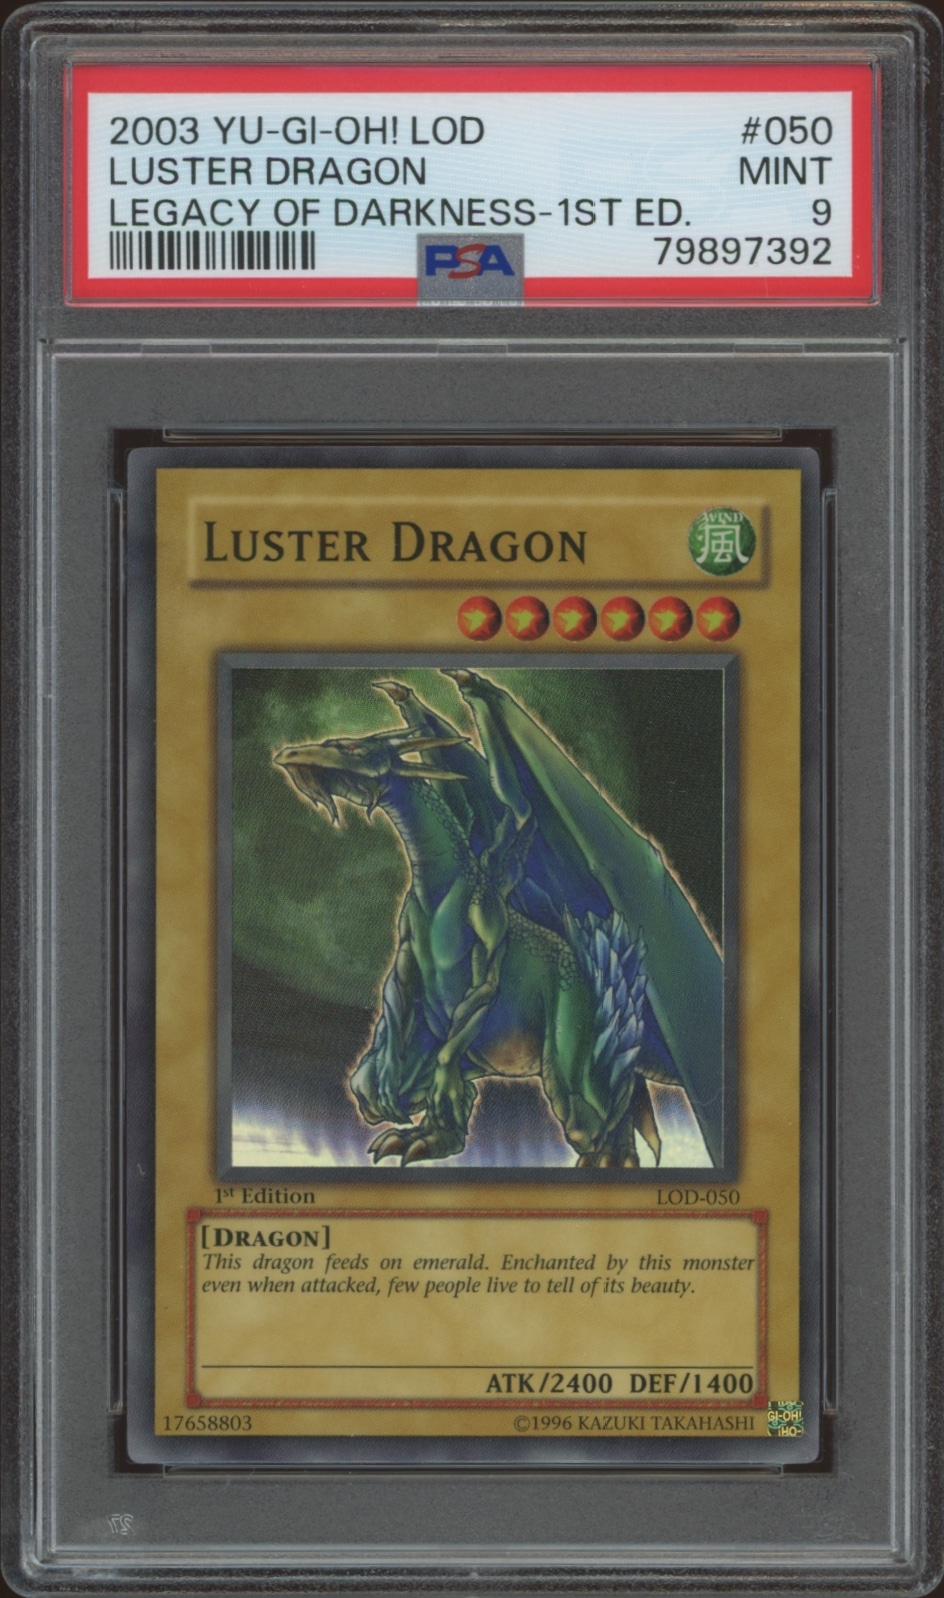 Graded 1st Edition Yu-Gi-Oh! Luster Dragon card from Legacy of Darkness set, rated PSA 9 MINT.